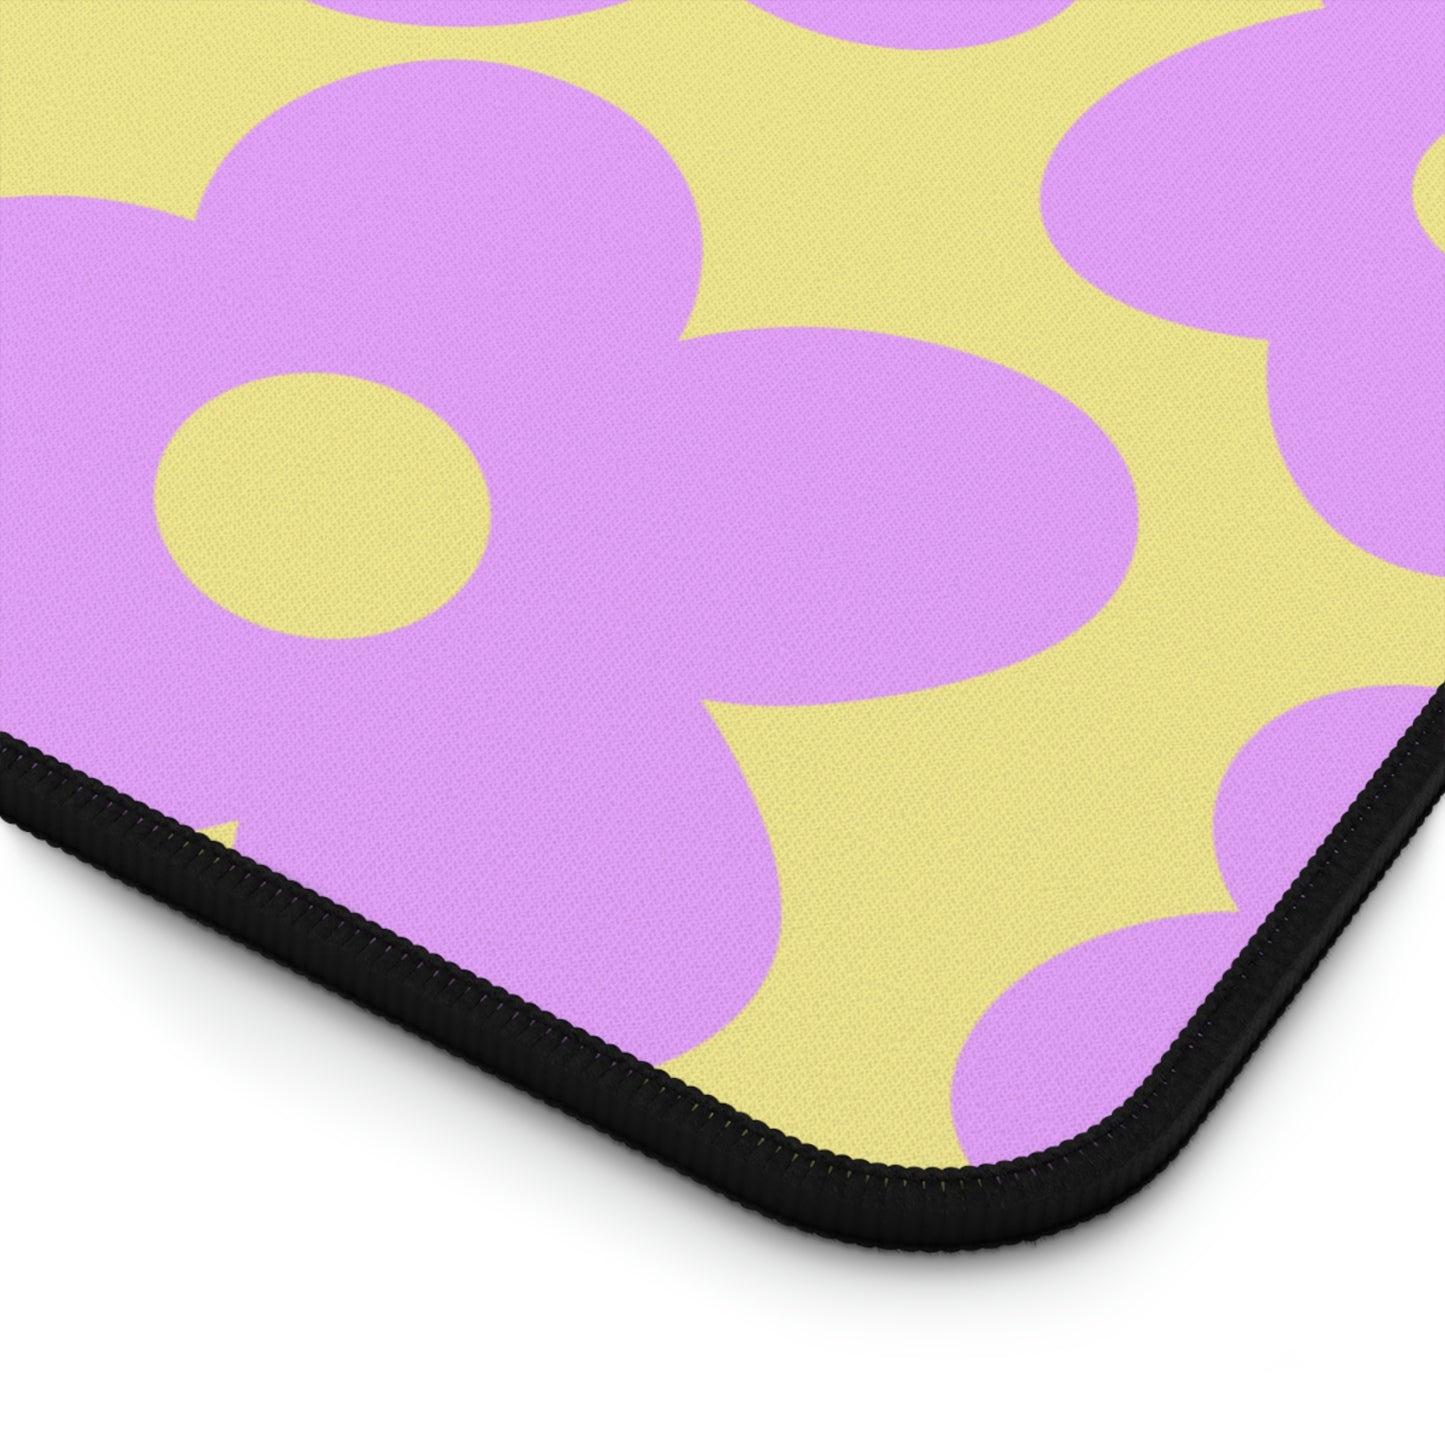 The corner of a 12" x 18" desk mat with purple flowers on a yellow background.